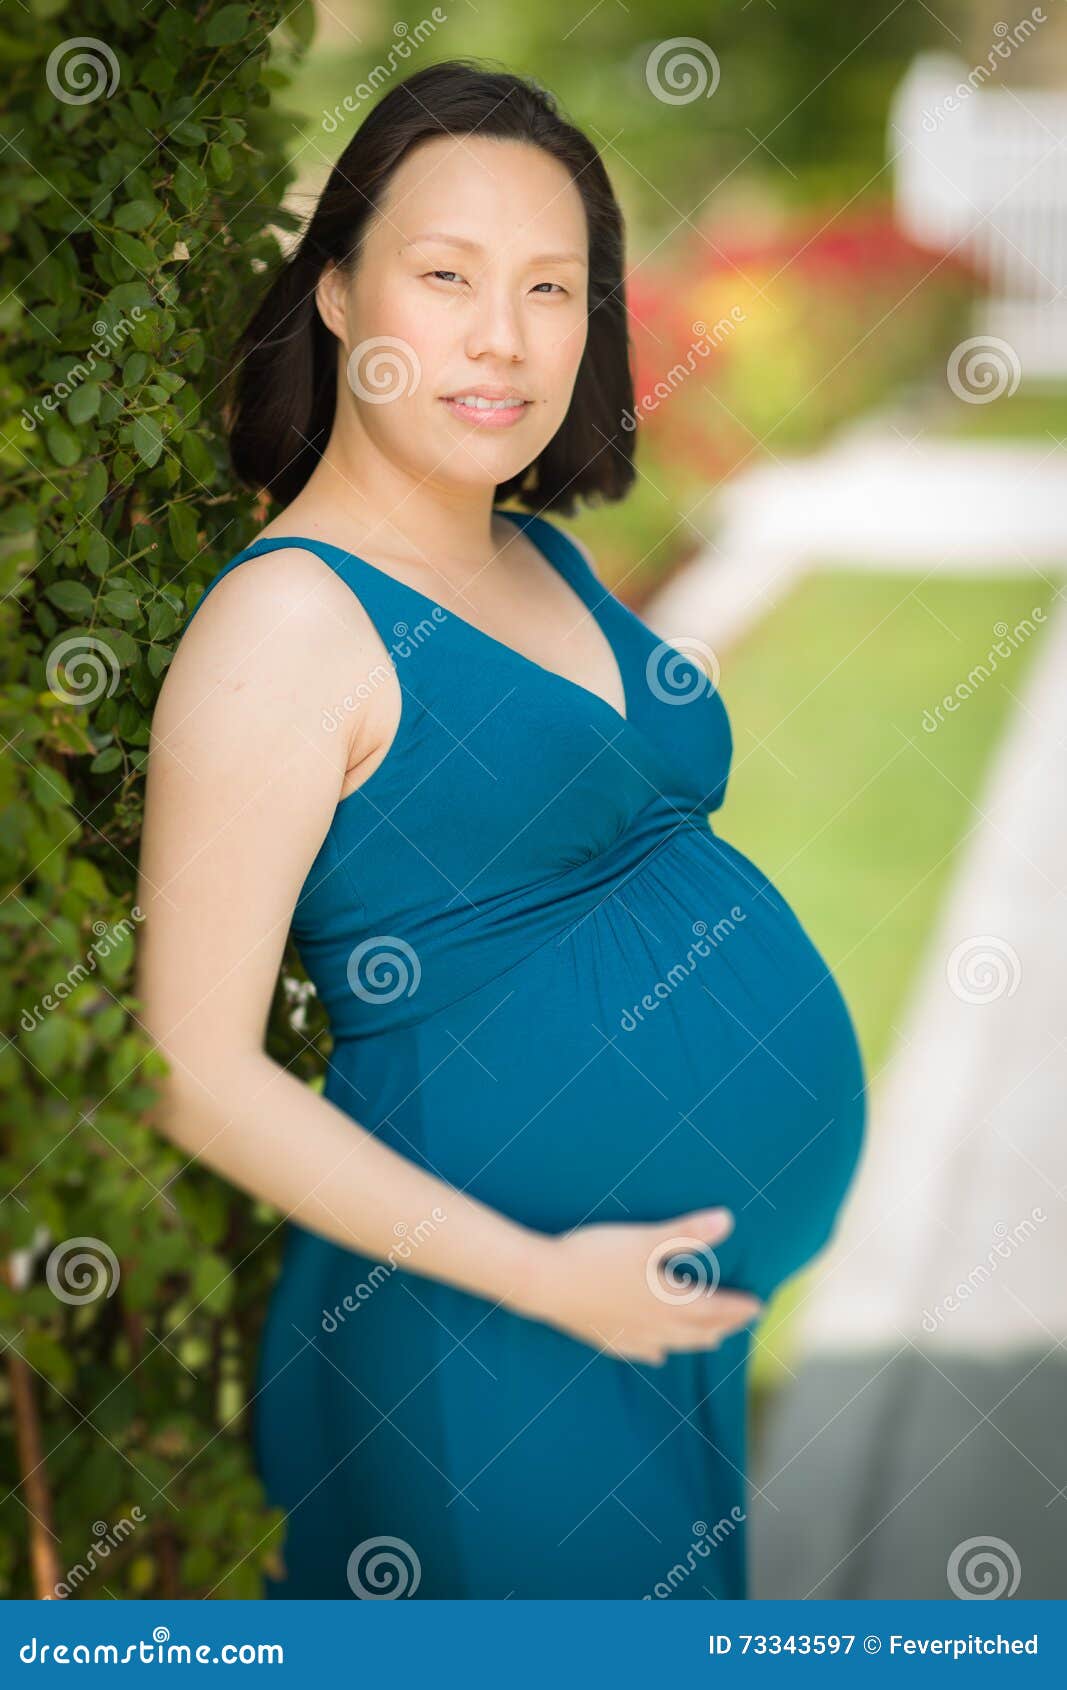 Young Pregnant Chinese Woman Portrait In Park Stock Image Image Of